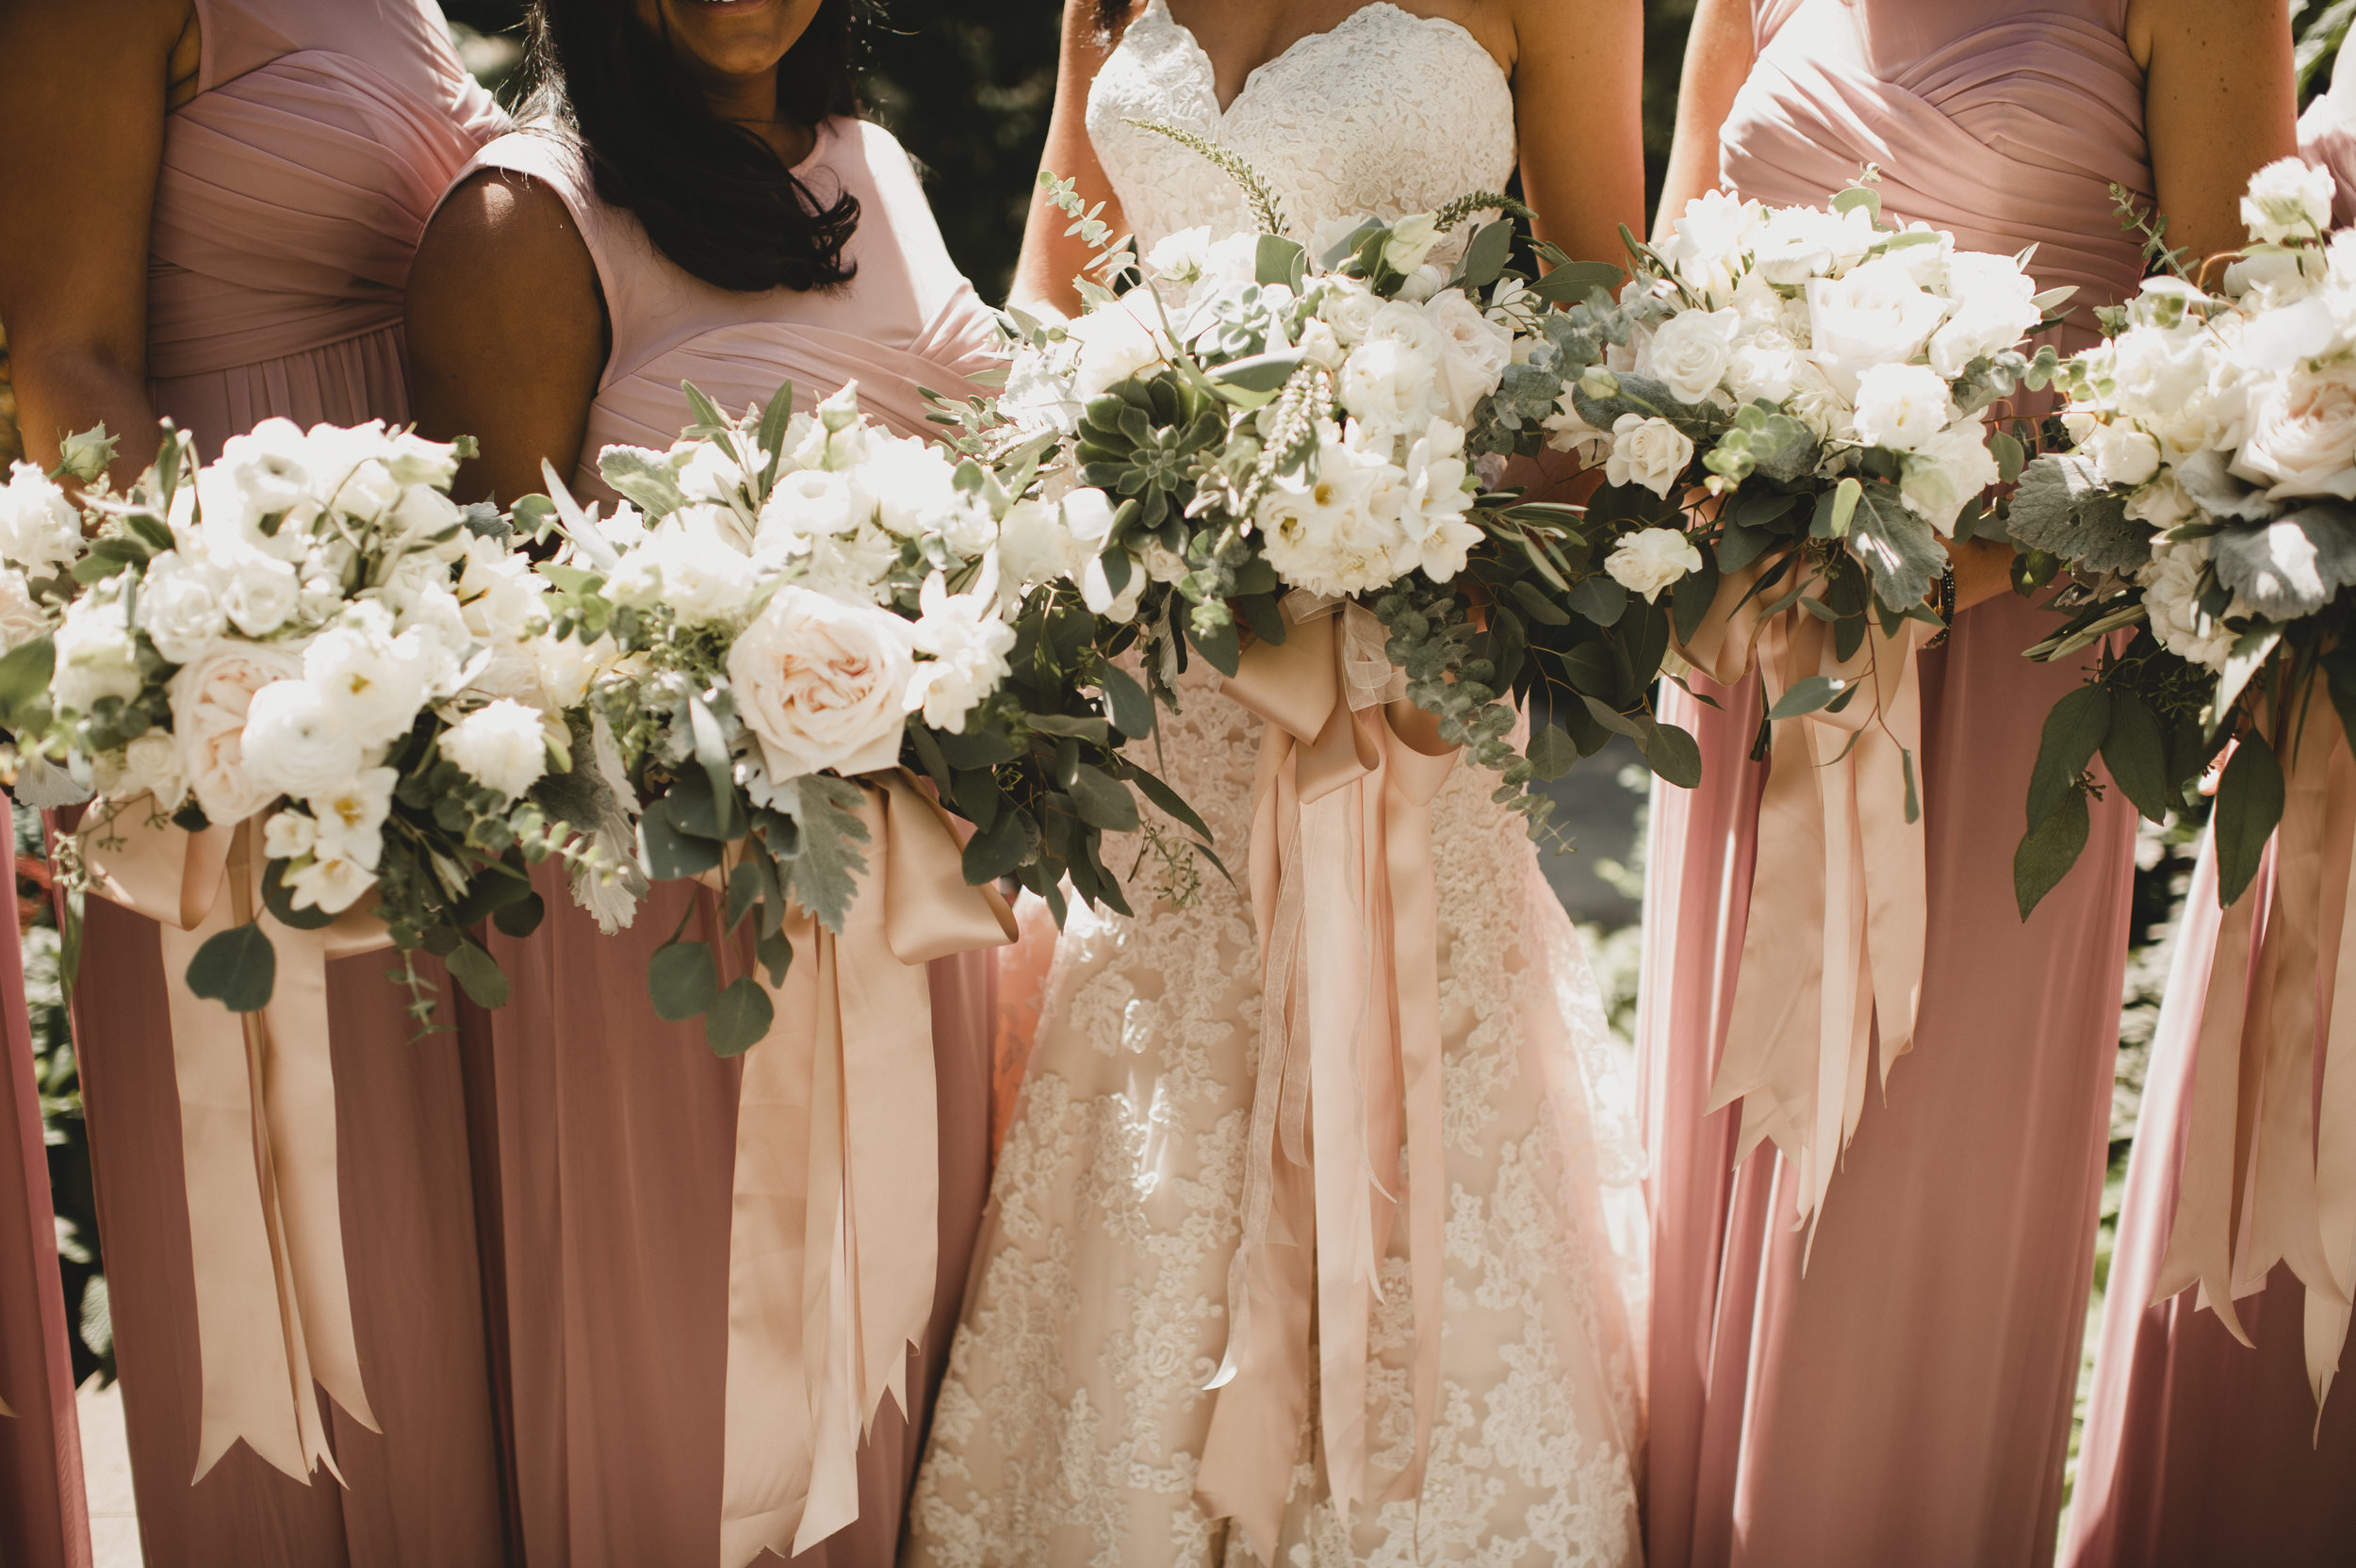 Collection of Bridesmaids Bouquets